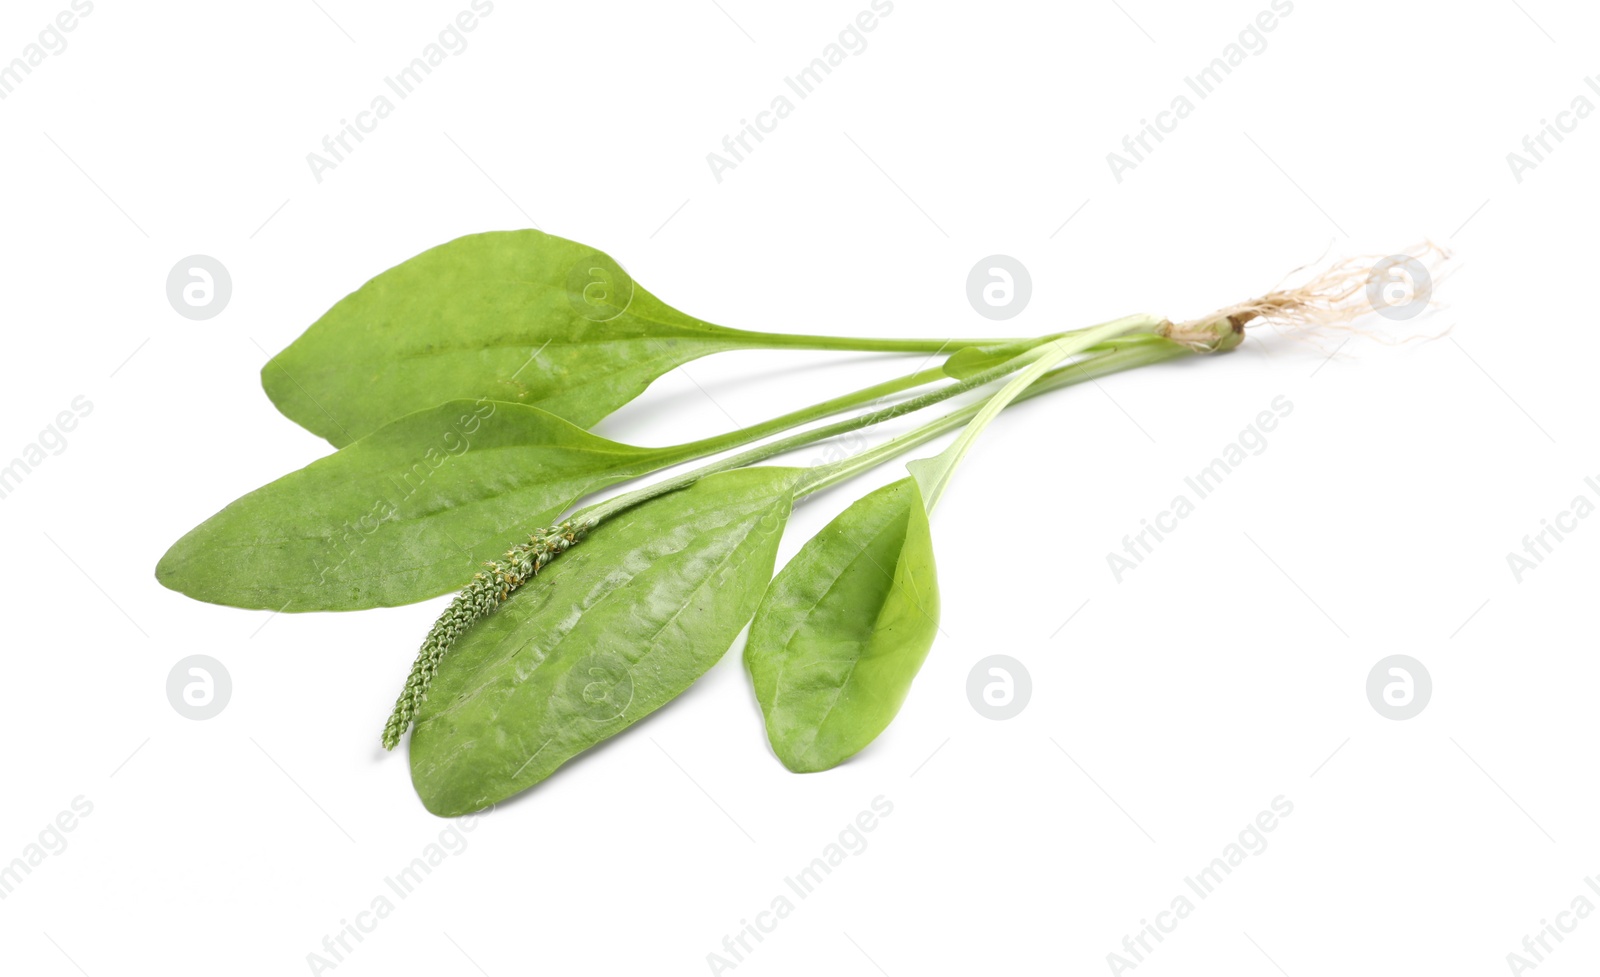 Photo of Broadleaf plantain with seeds on white background. Medicinal herb